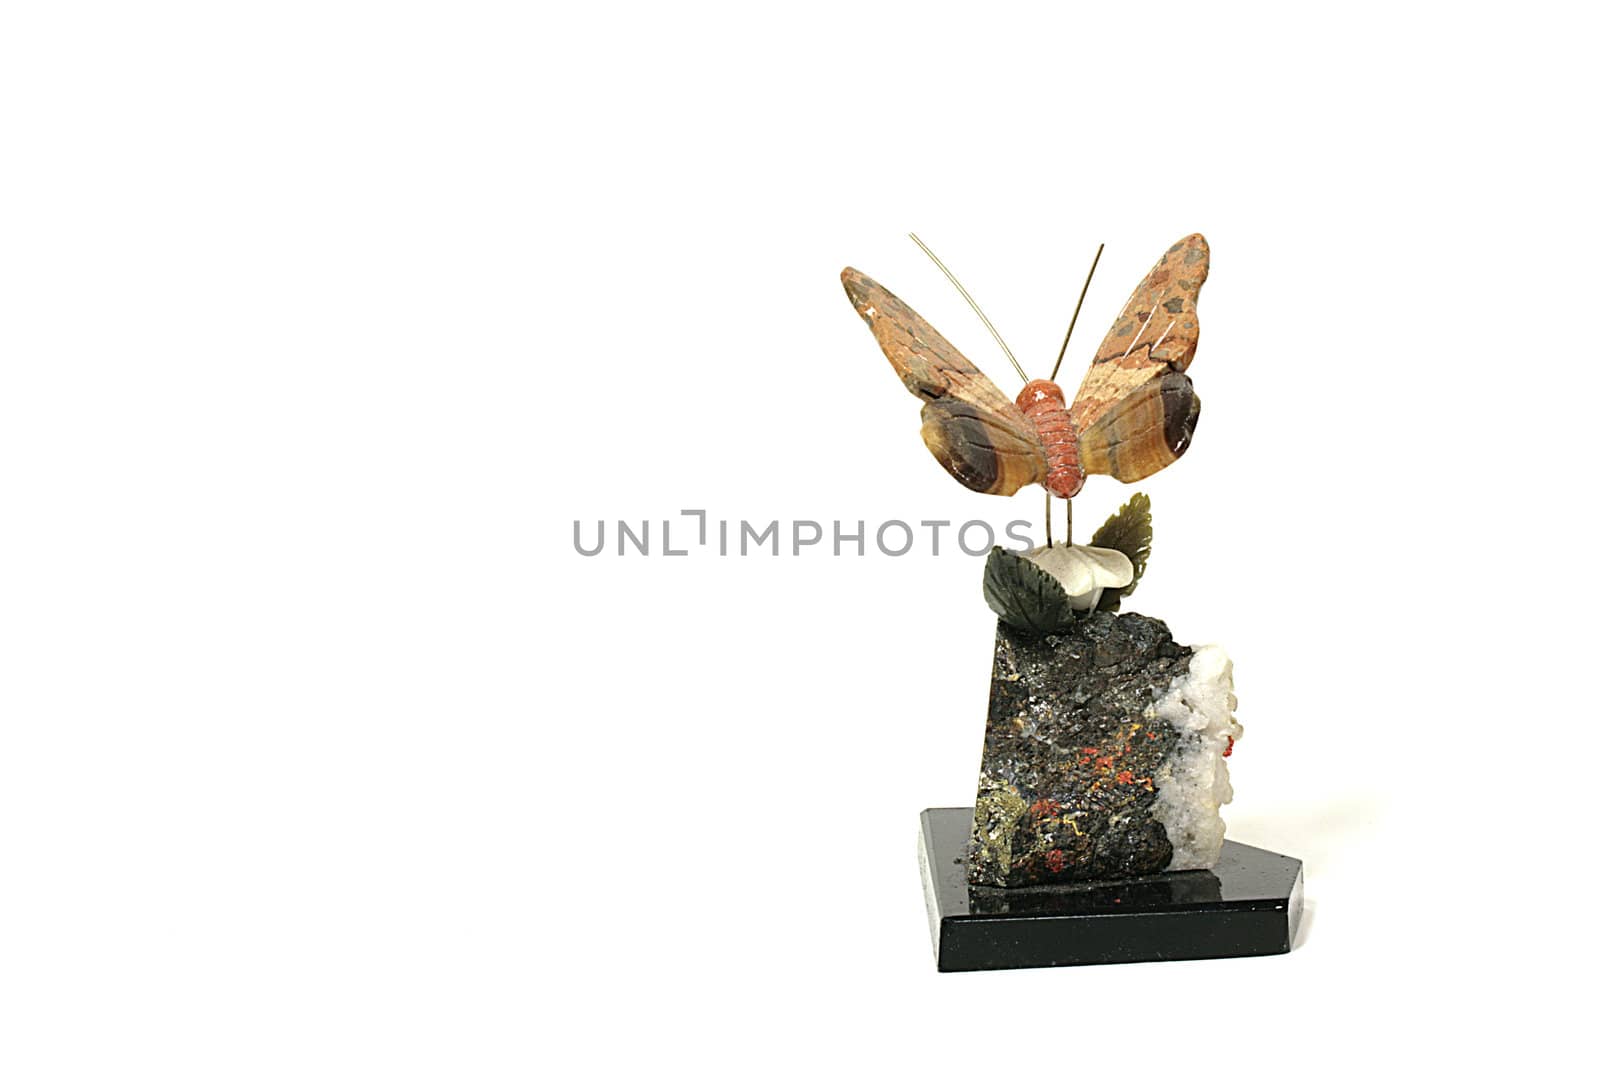 The decorative stone butterfly can be used in an interior.